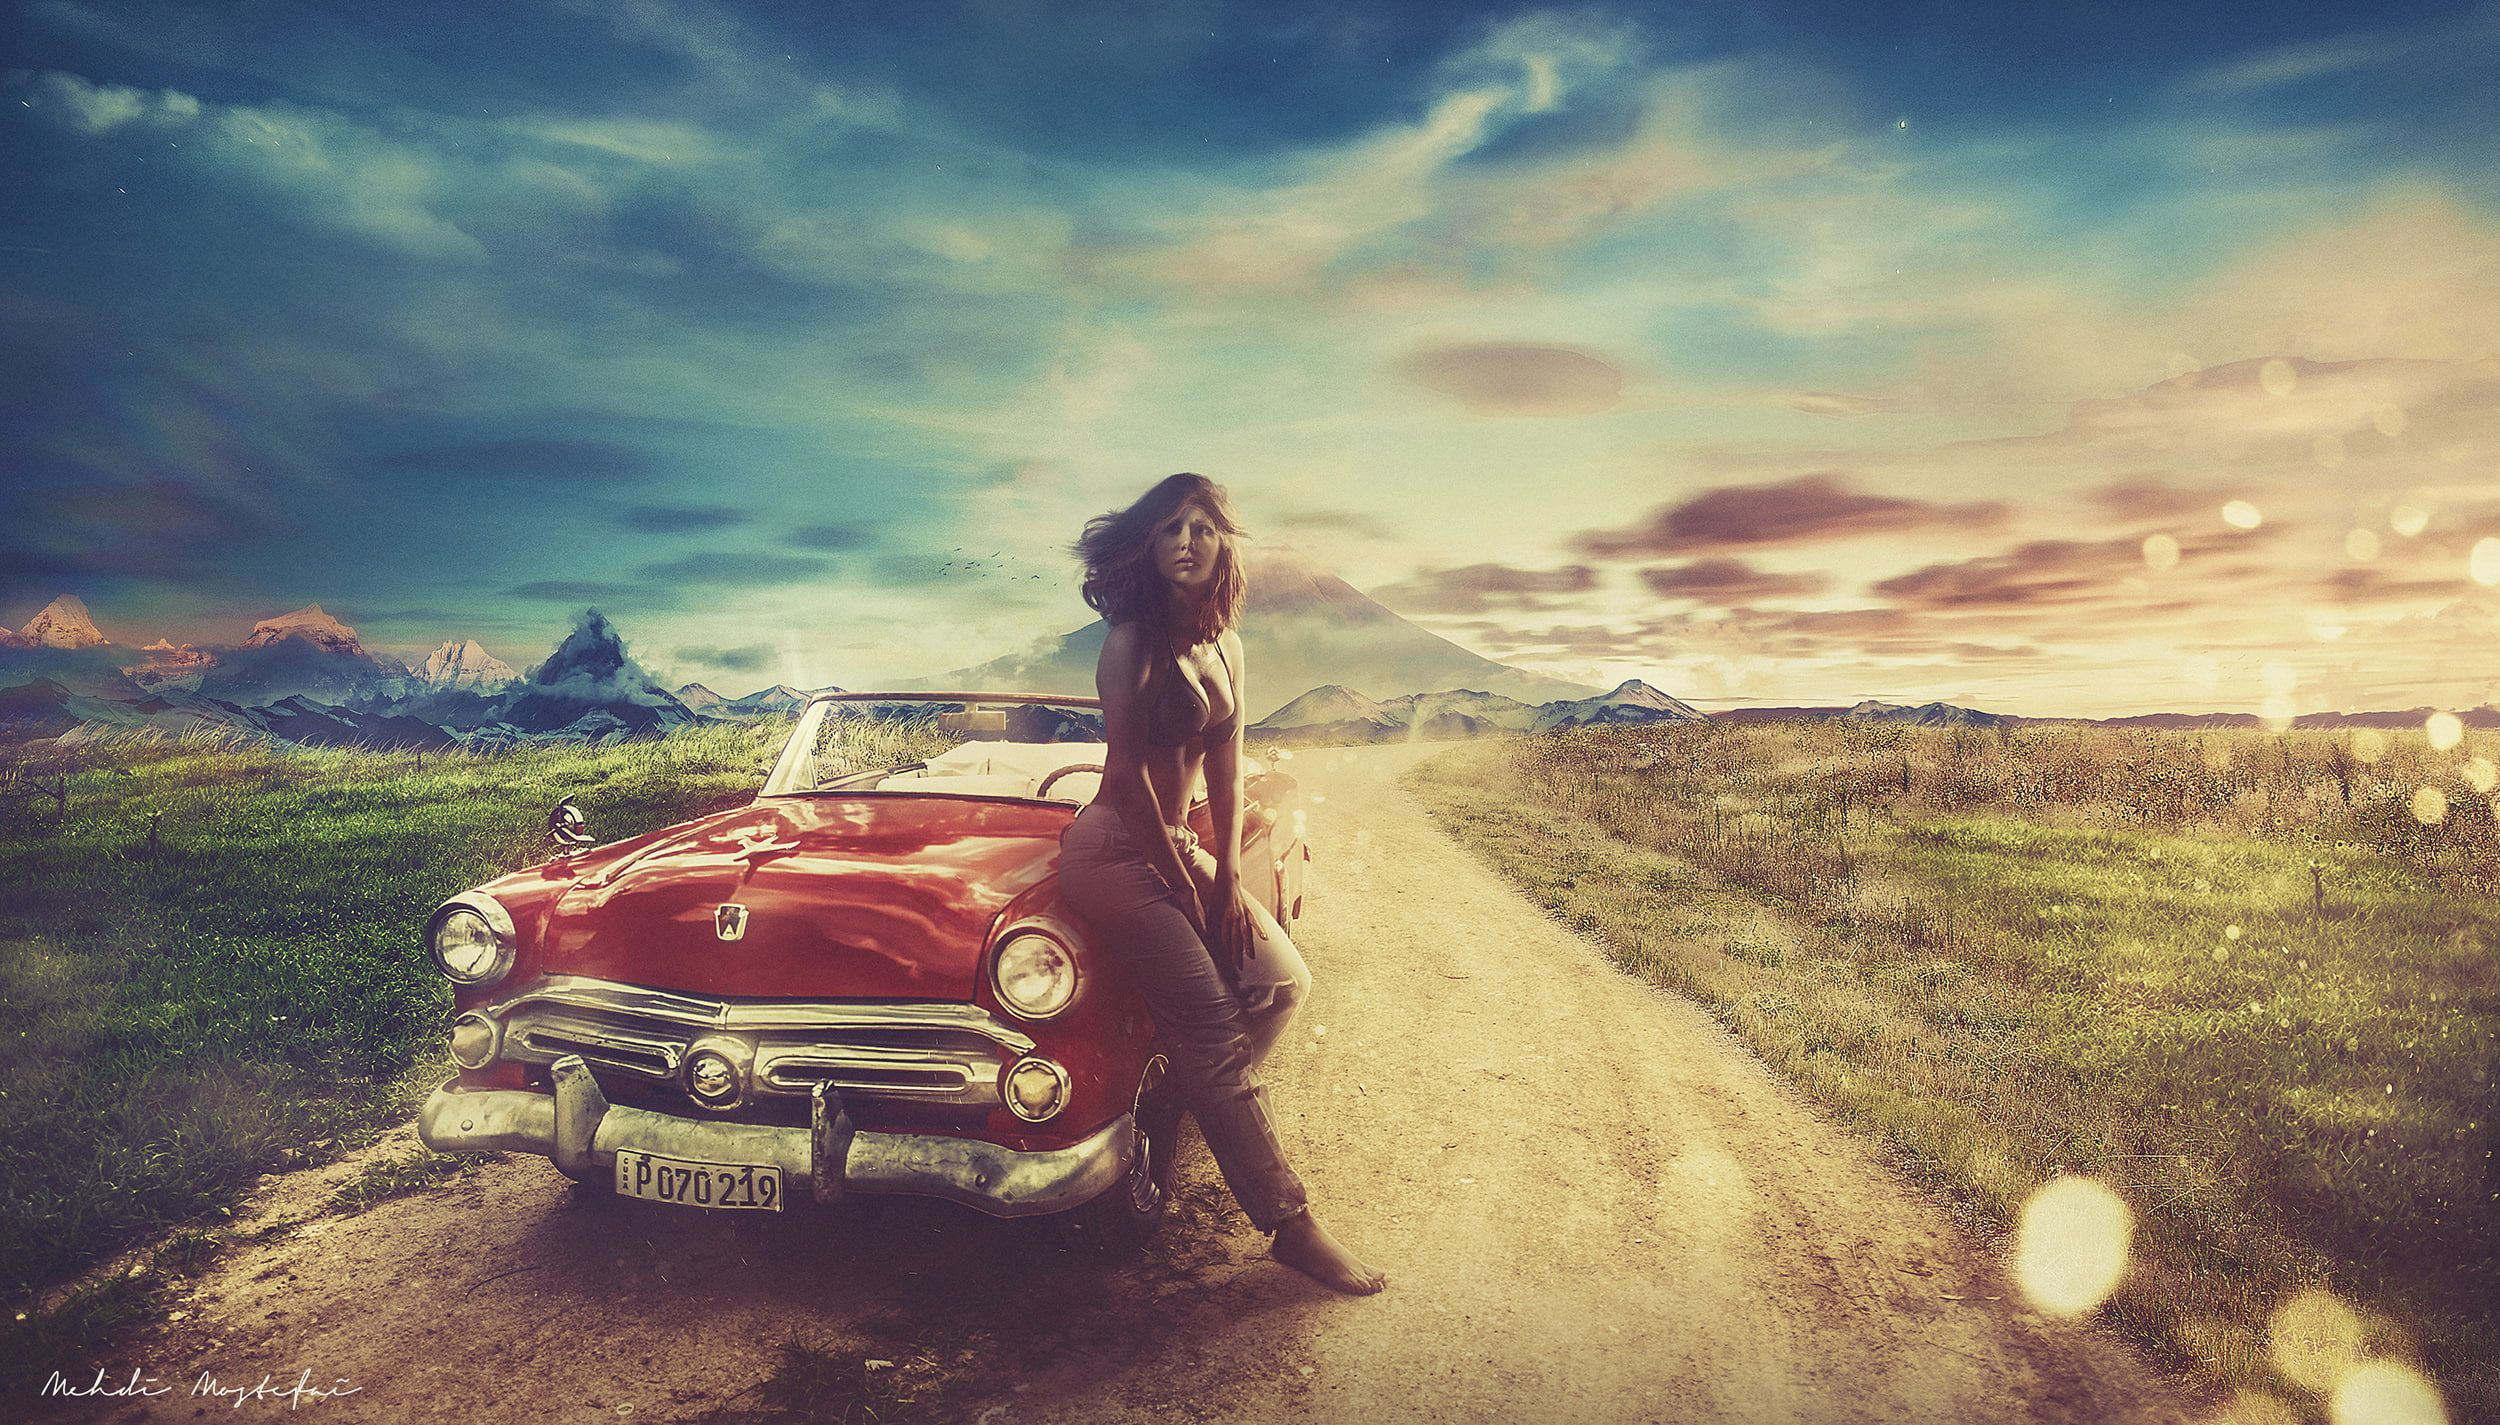 2500x1425 woman on red car painting Hot girl Vintage car #Landscape #Warm #HD #1080P # wallpaper #hdwallpaper #desk&acirc;&#128;&brvbar; | Red car, Vintage desktop wallpapers, Vintage photography